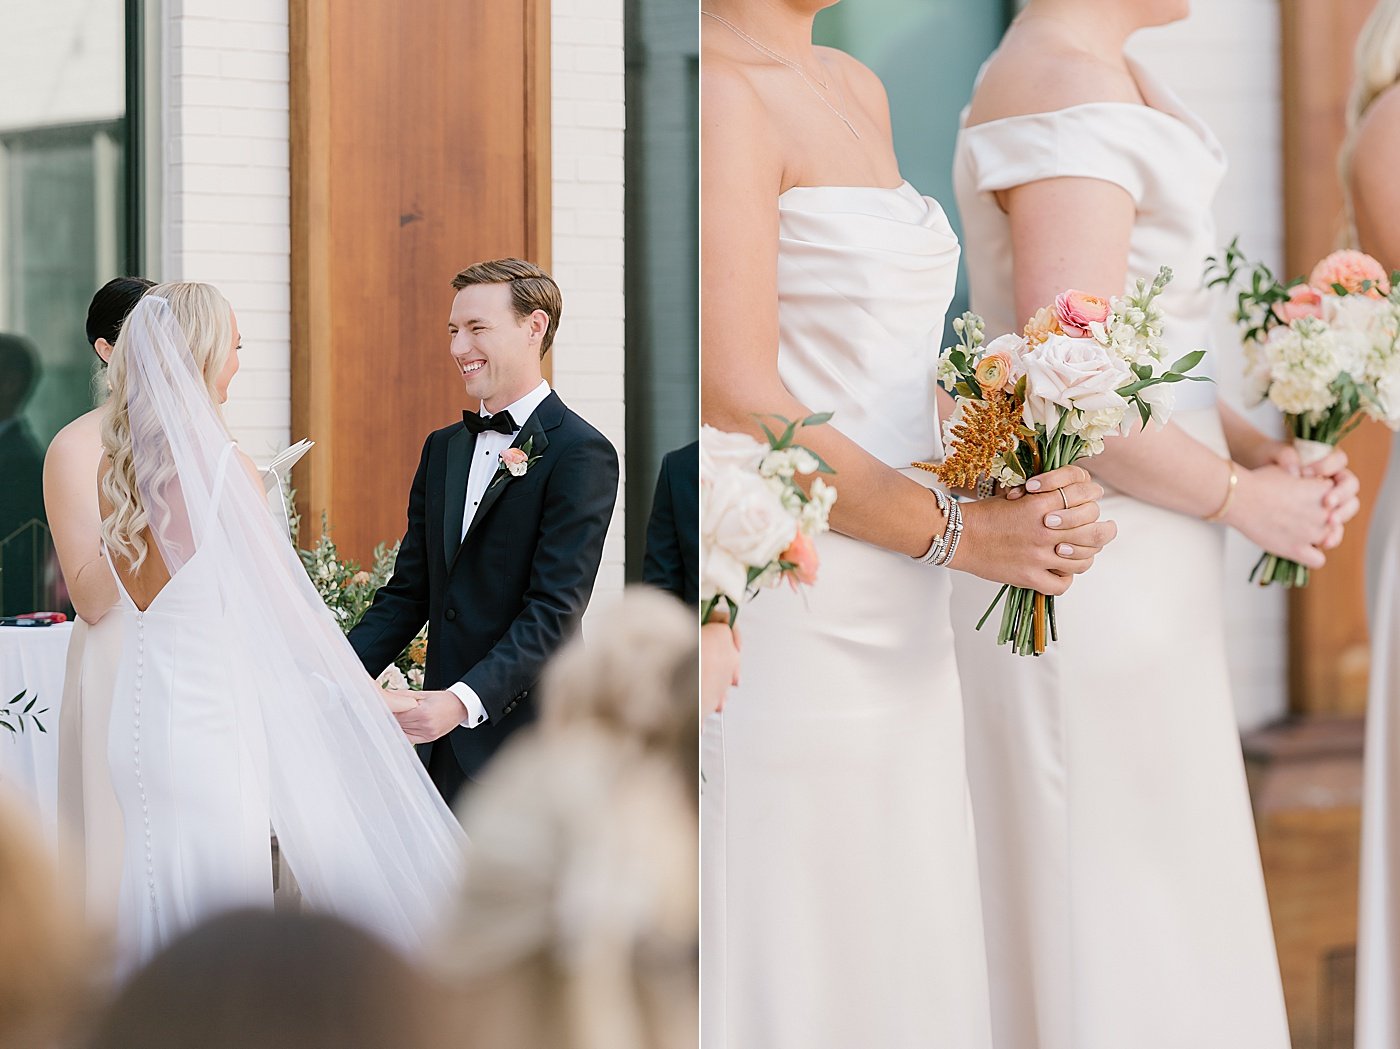 Rebecca Shehorn Photography Haley and Will's Bottleworks Indy Hotel Wedding-501.jpg